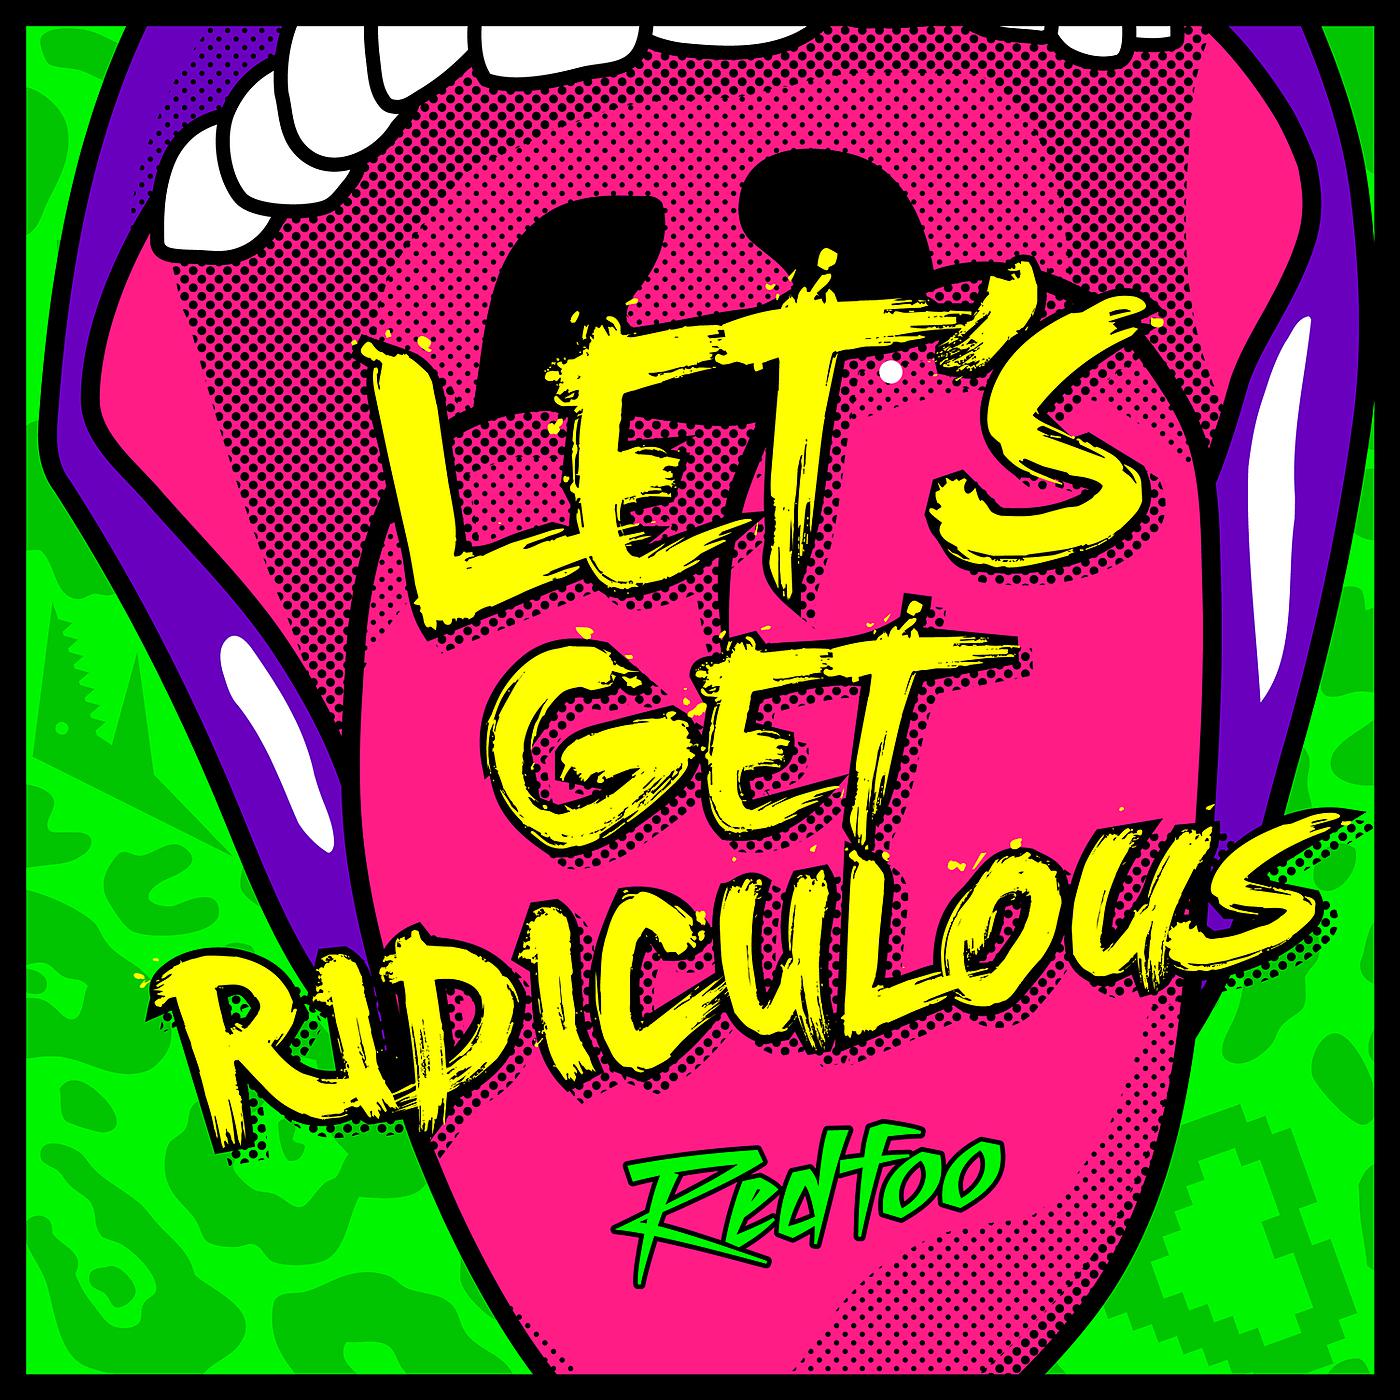 Lets 00. Redfoo Let's get. Redfoo ridiculous. Let's get ridiculous. Let's get ridiculous LMFAO.